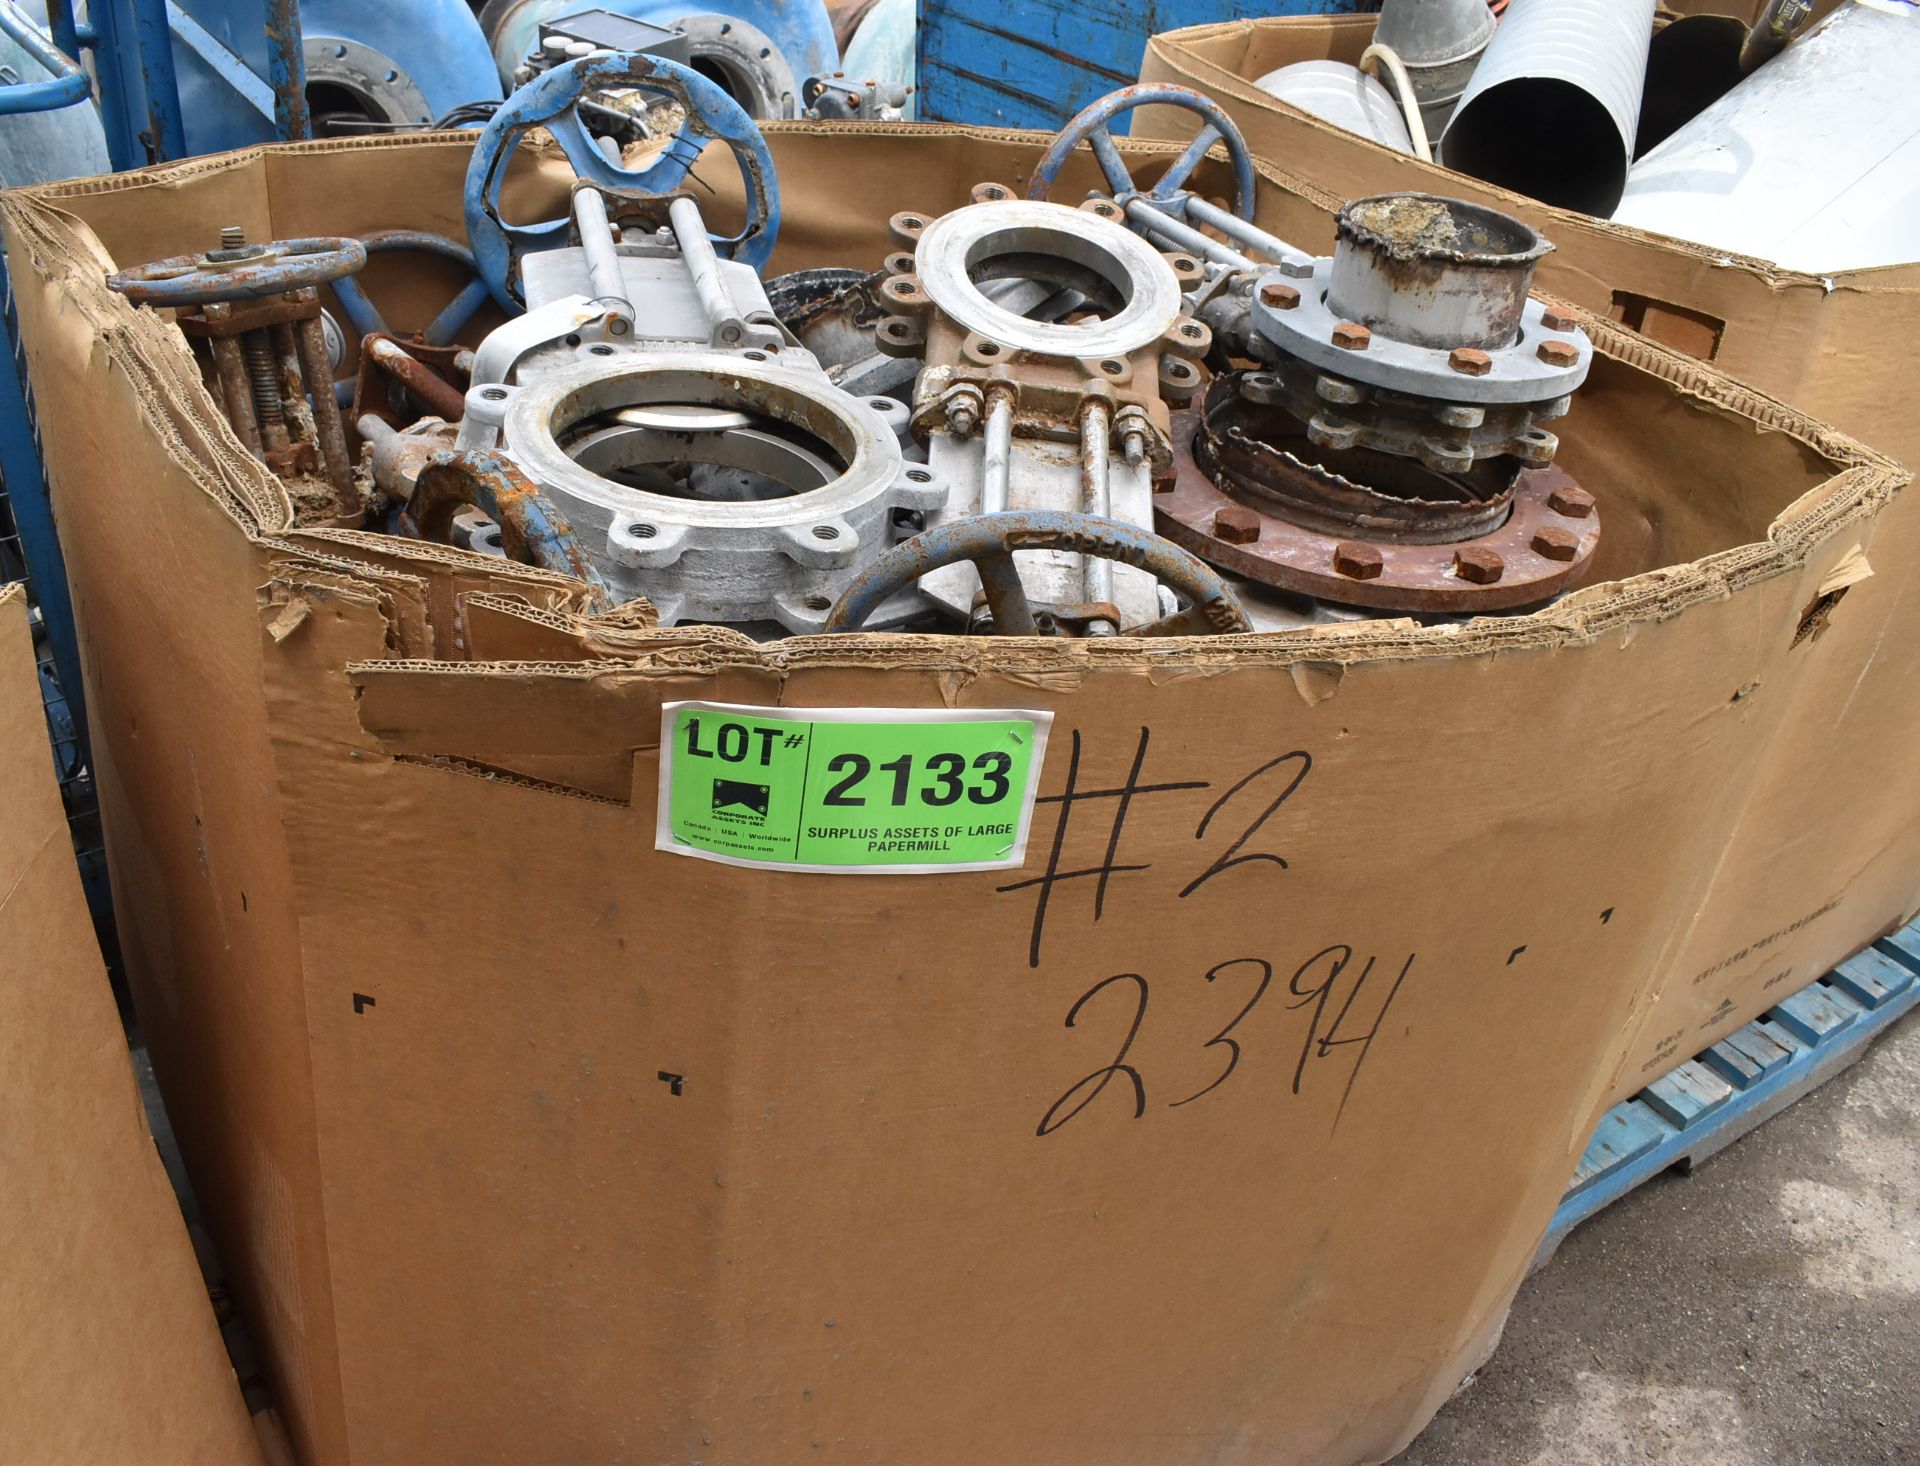 LOT/ GAYLORD WITH CONTENTS - KNIFE VALVES - VARIOUS SIZES [RIGGING FEE FOR LOT #2133 - $25 USD